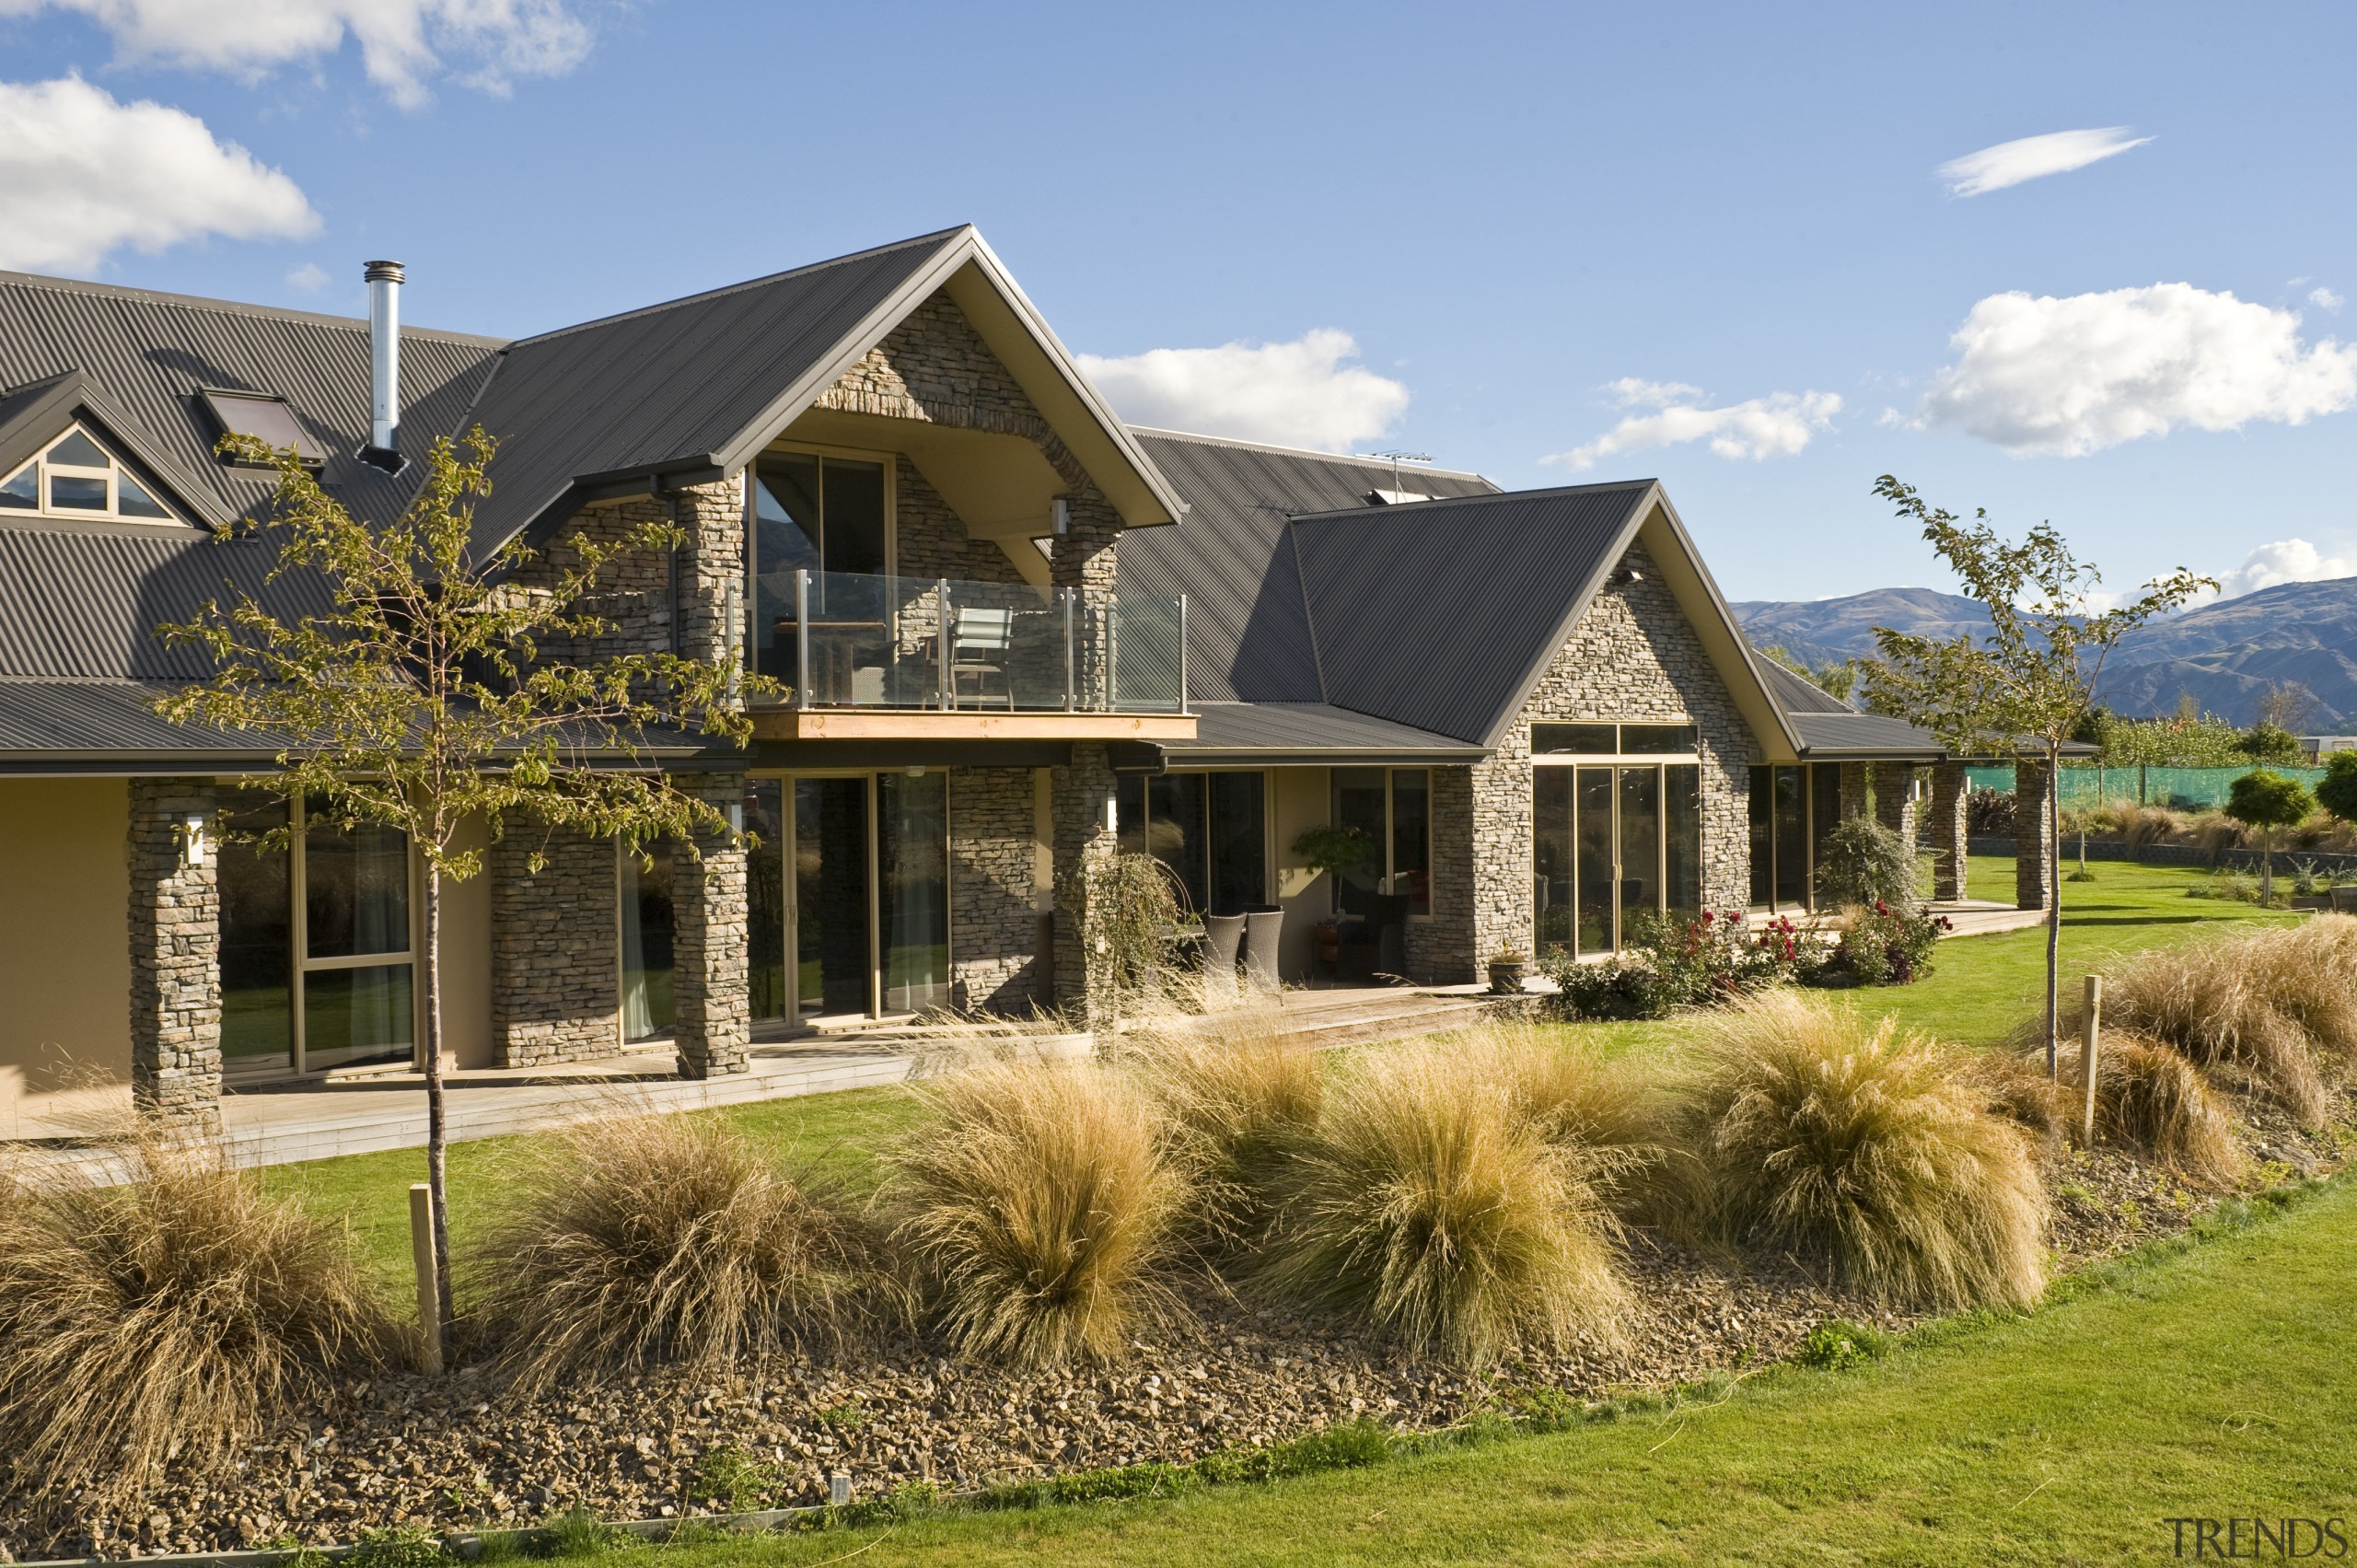 Image of this new home in central Otago cottage, elevation, estate, facade, farmhouse, grass, home, house, landscape, landscaping, lawn, property, real estate, residential area, roof, siding, brown